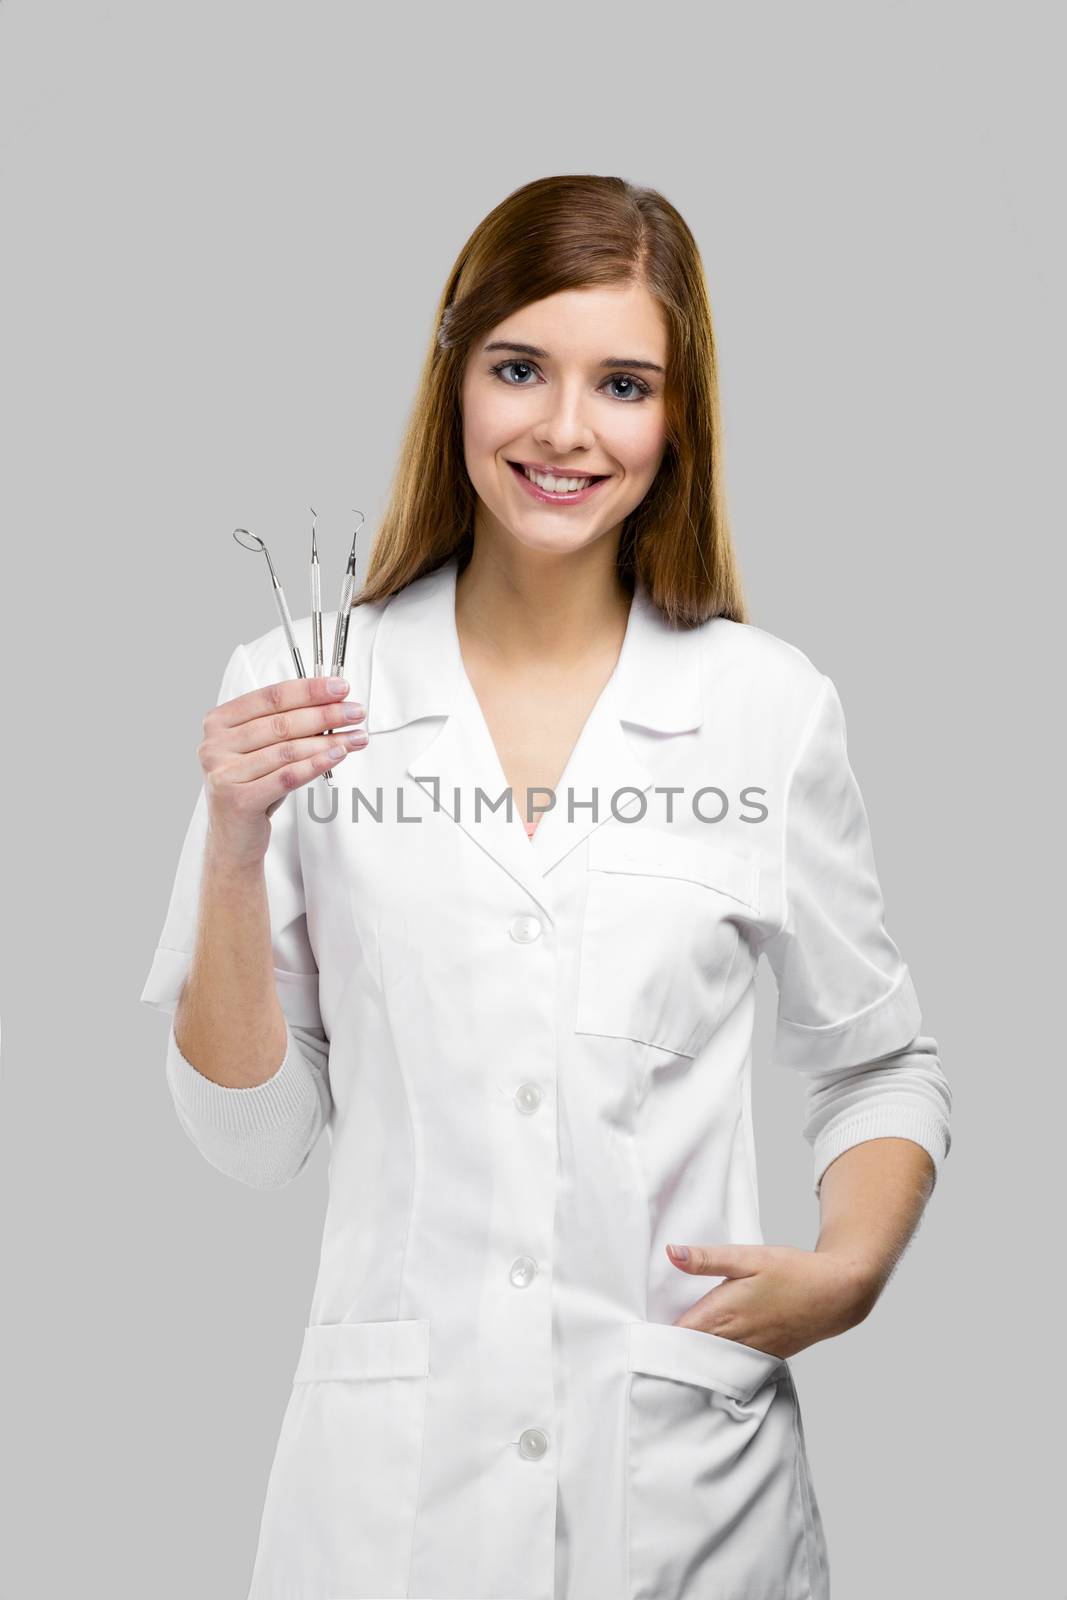 Beautiful and attractive female dentist with tools, over a gray background